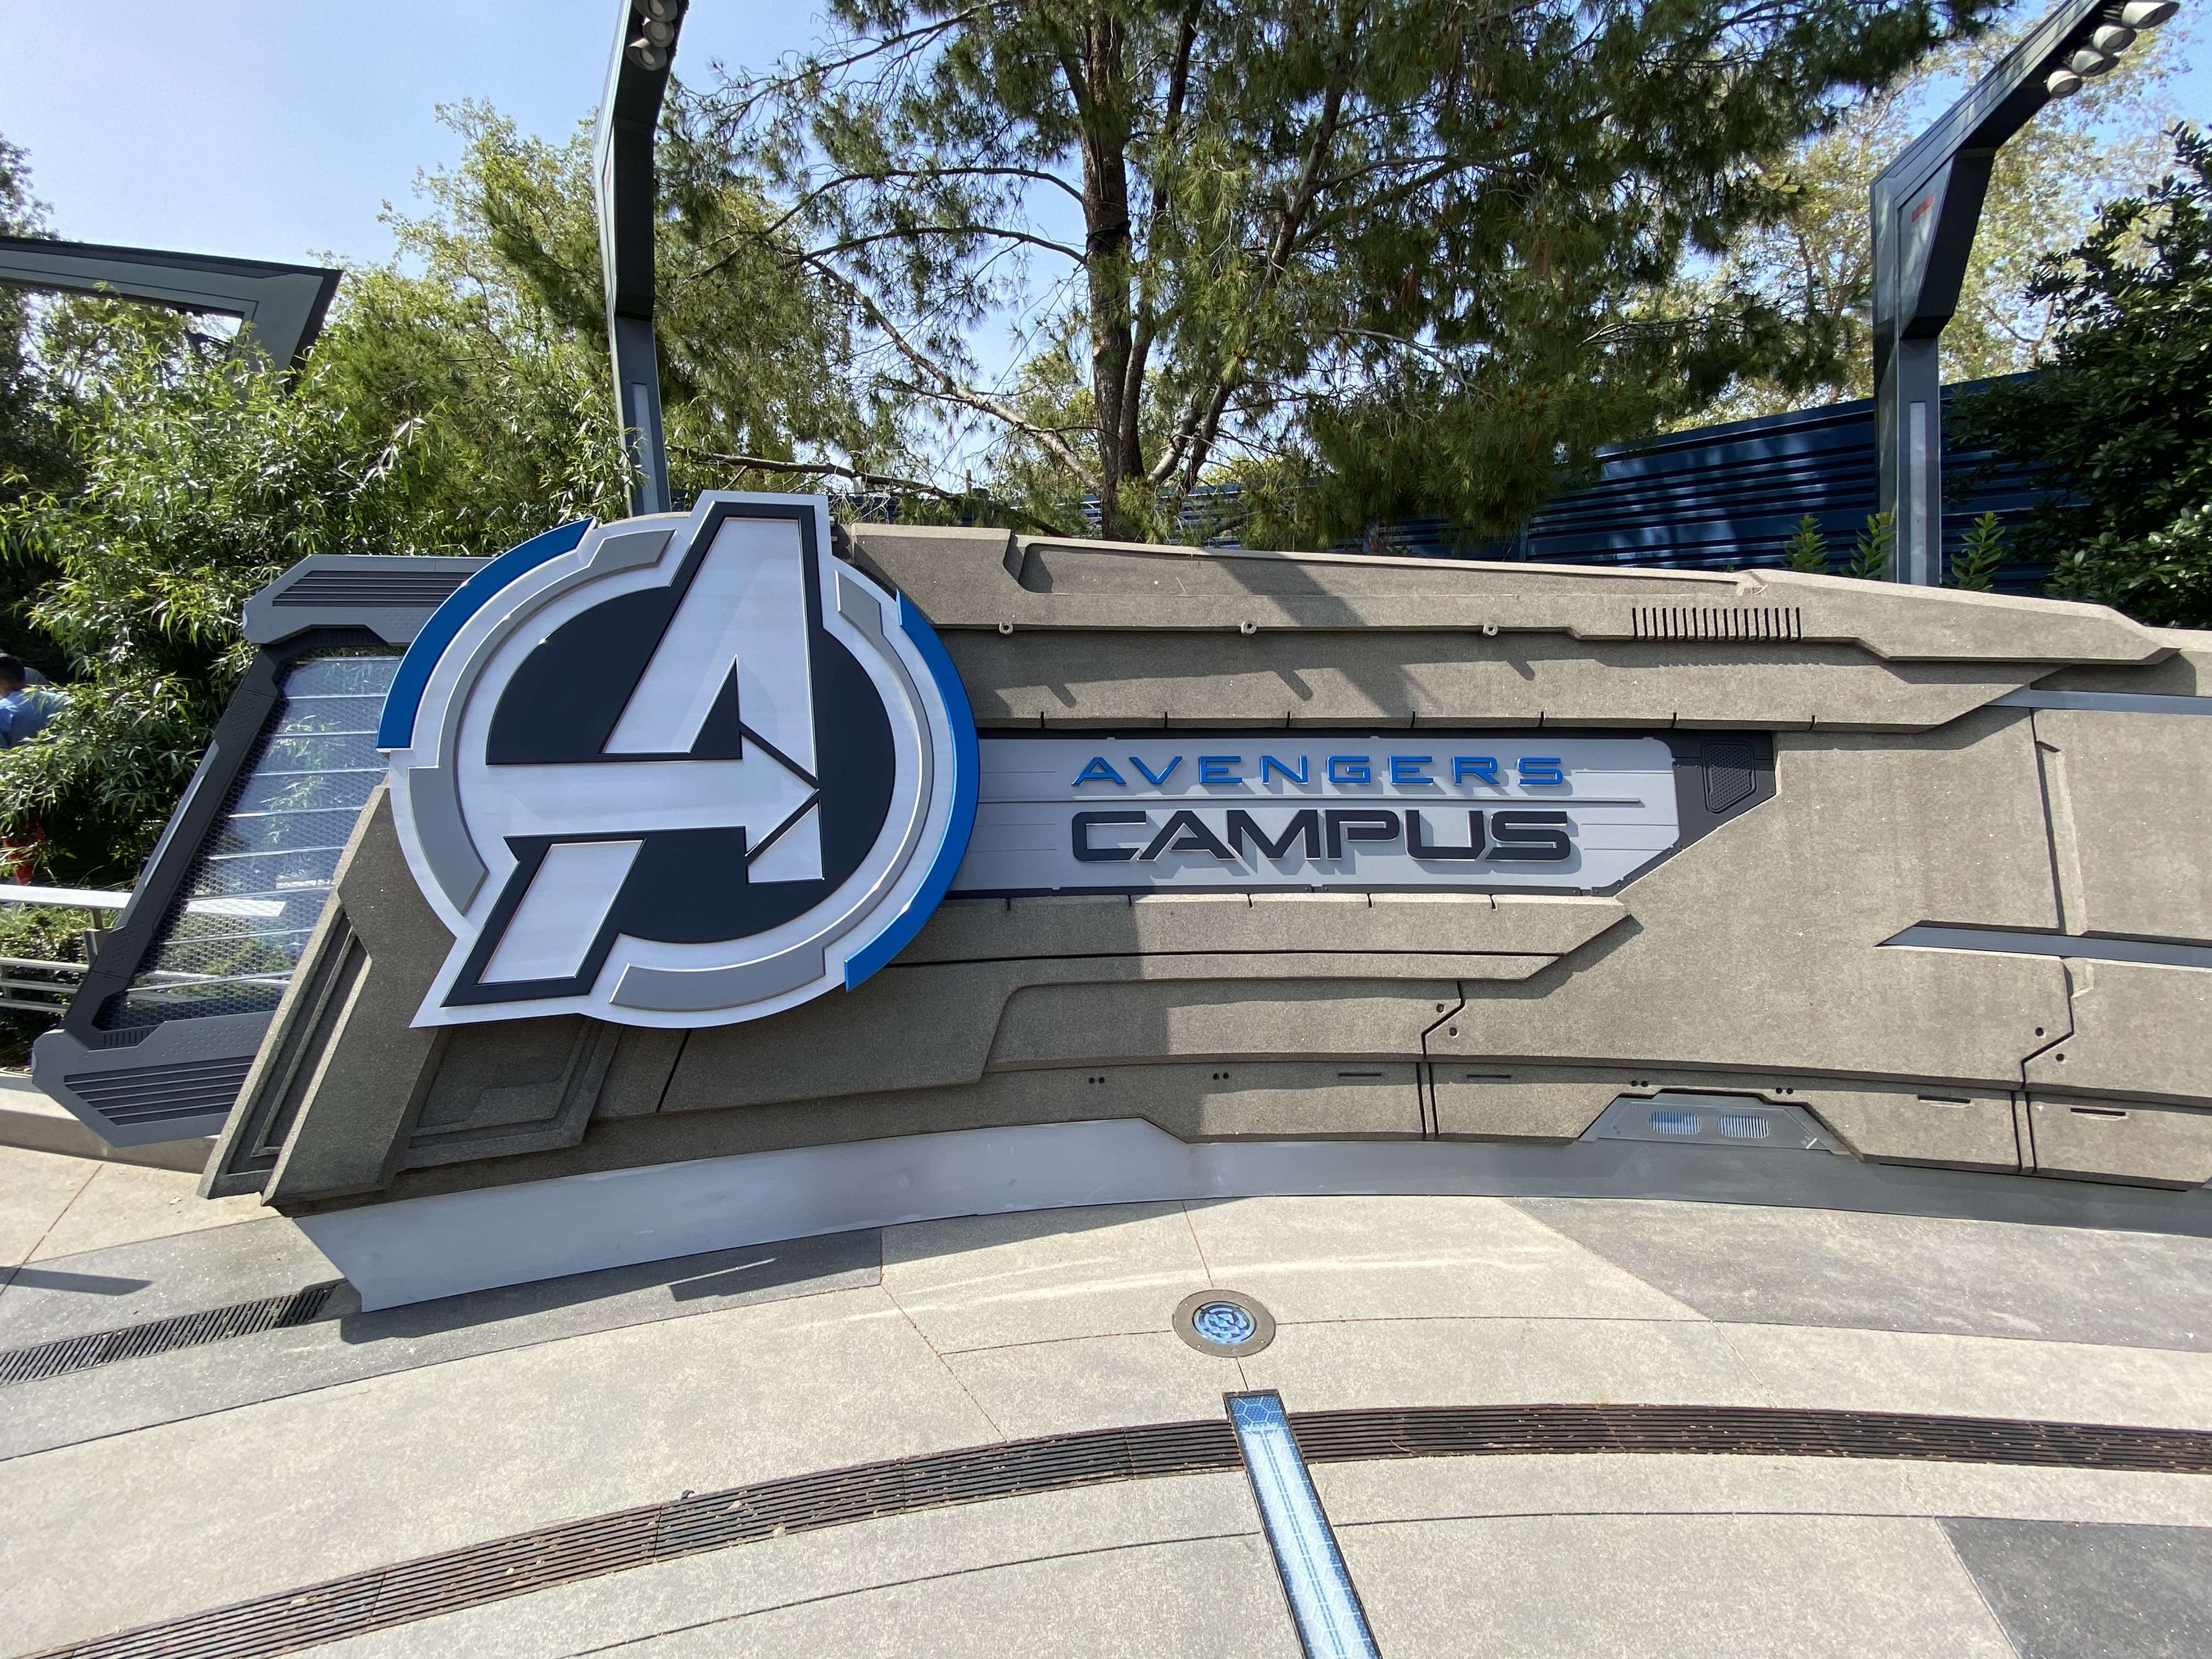 Avengers Campus welcome sign